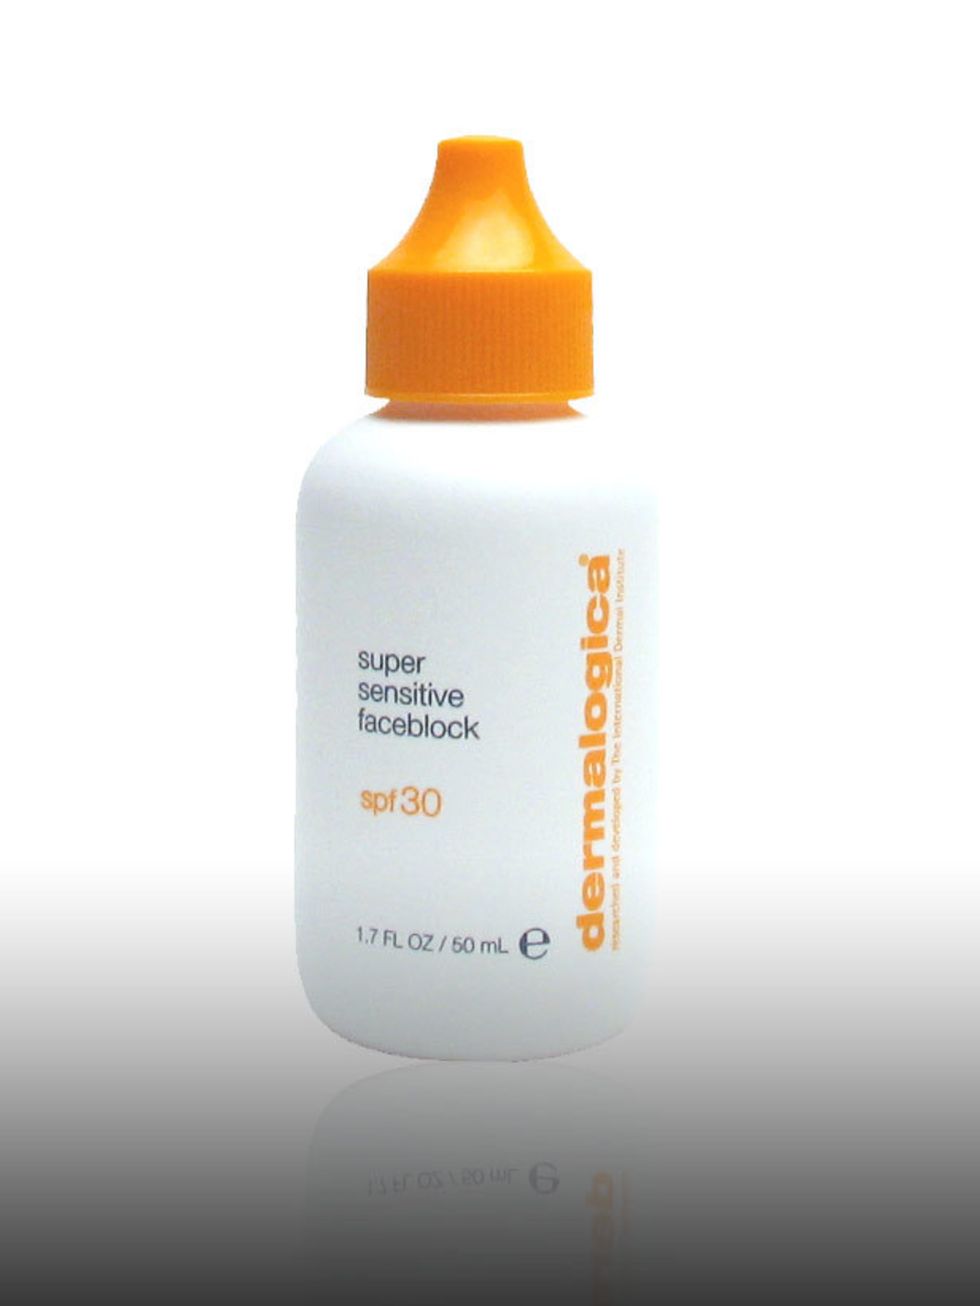 <p>Super sensitive face block SPF 30, £29.80 by <a href="http://www.dermalogica.co.uk/product_international.asp?region=A&amp;location=UK">Dermalogica</a>. For stockists call 0800 591 818. </p><p>Alexa has great skin and the key is using a good SPF. She te